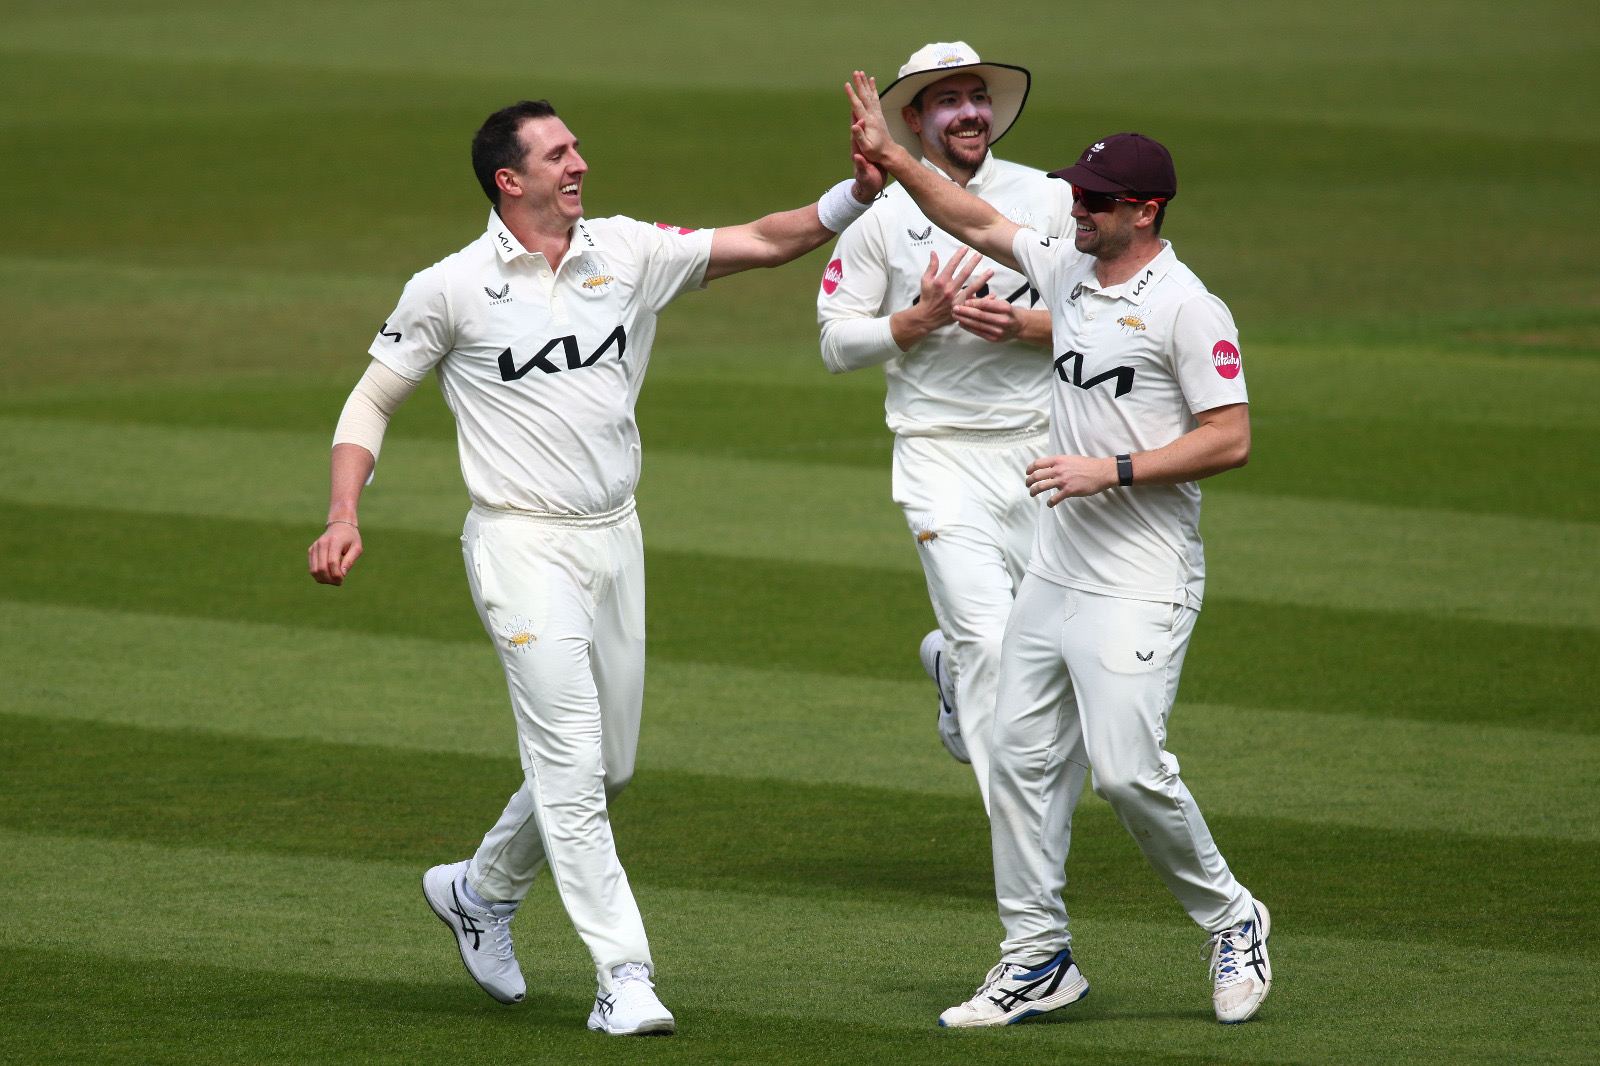 Swing and seam dominate first day at The Kia Oval